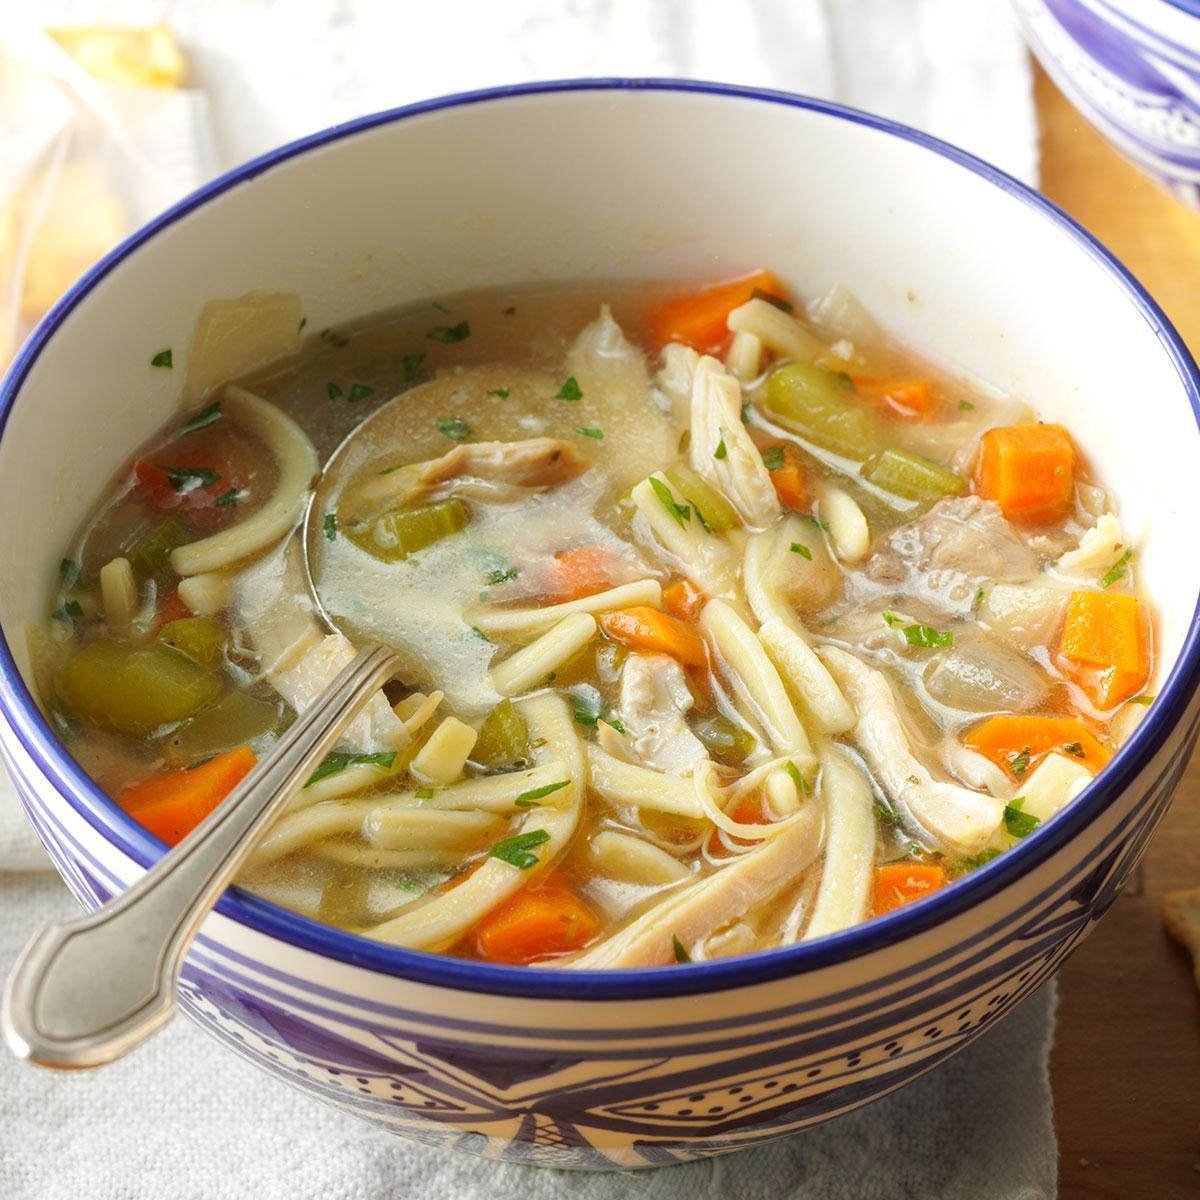 Can You Freeze Soup?